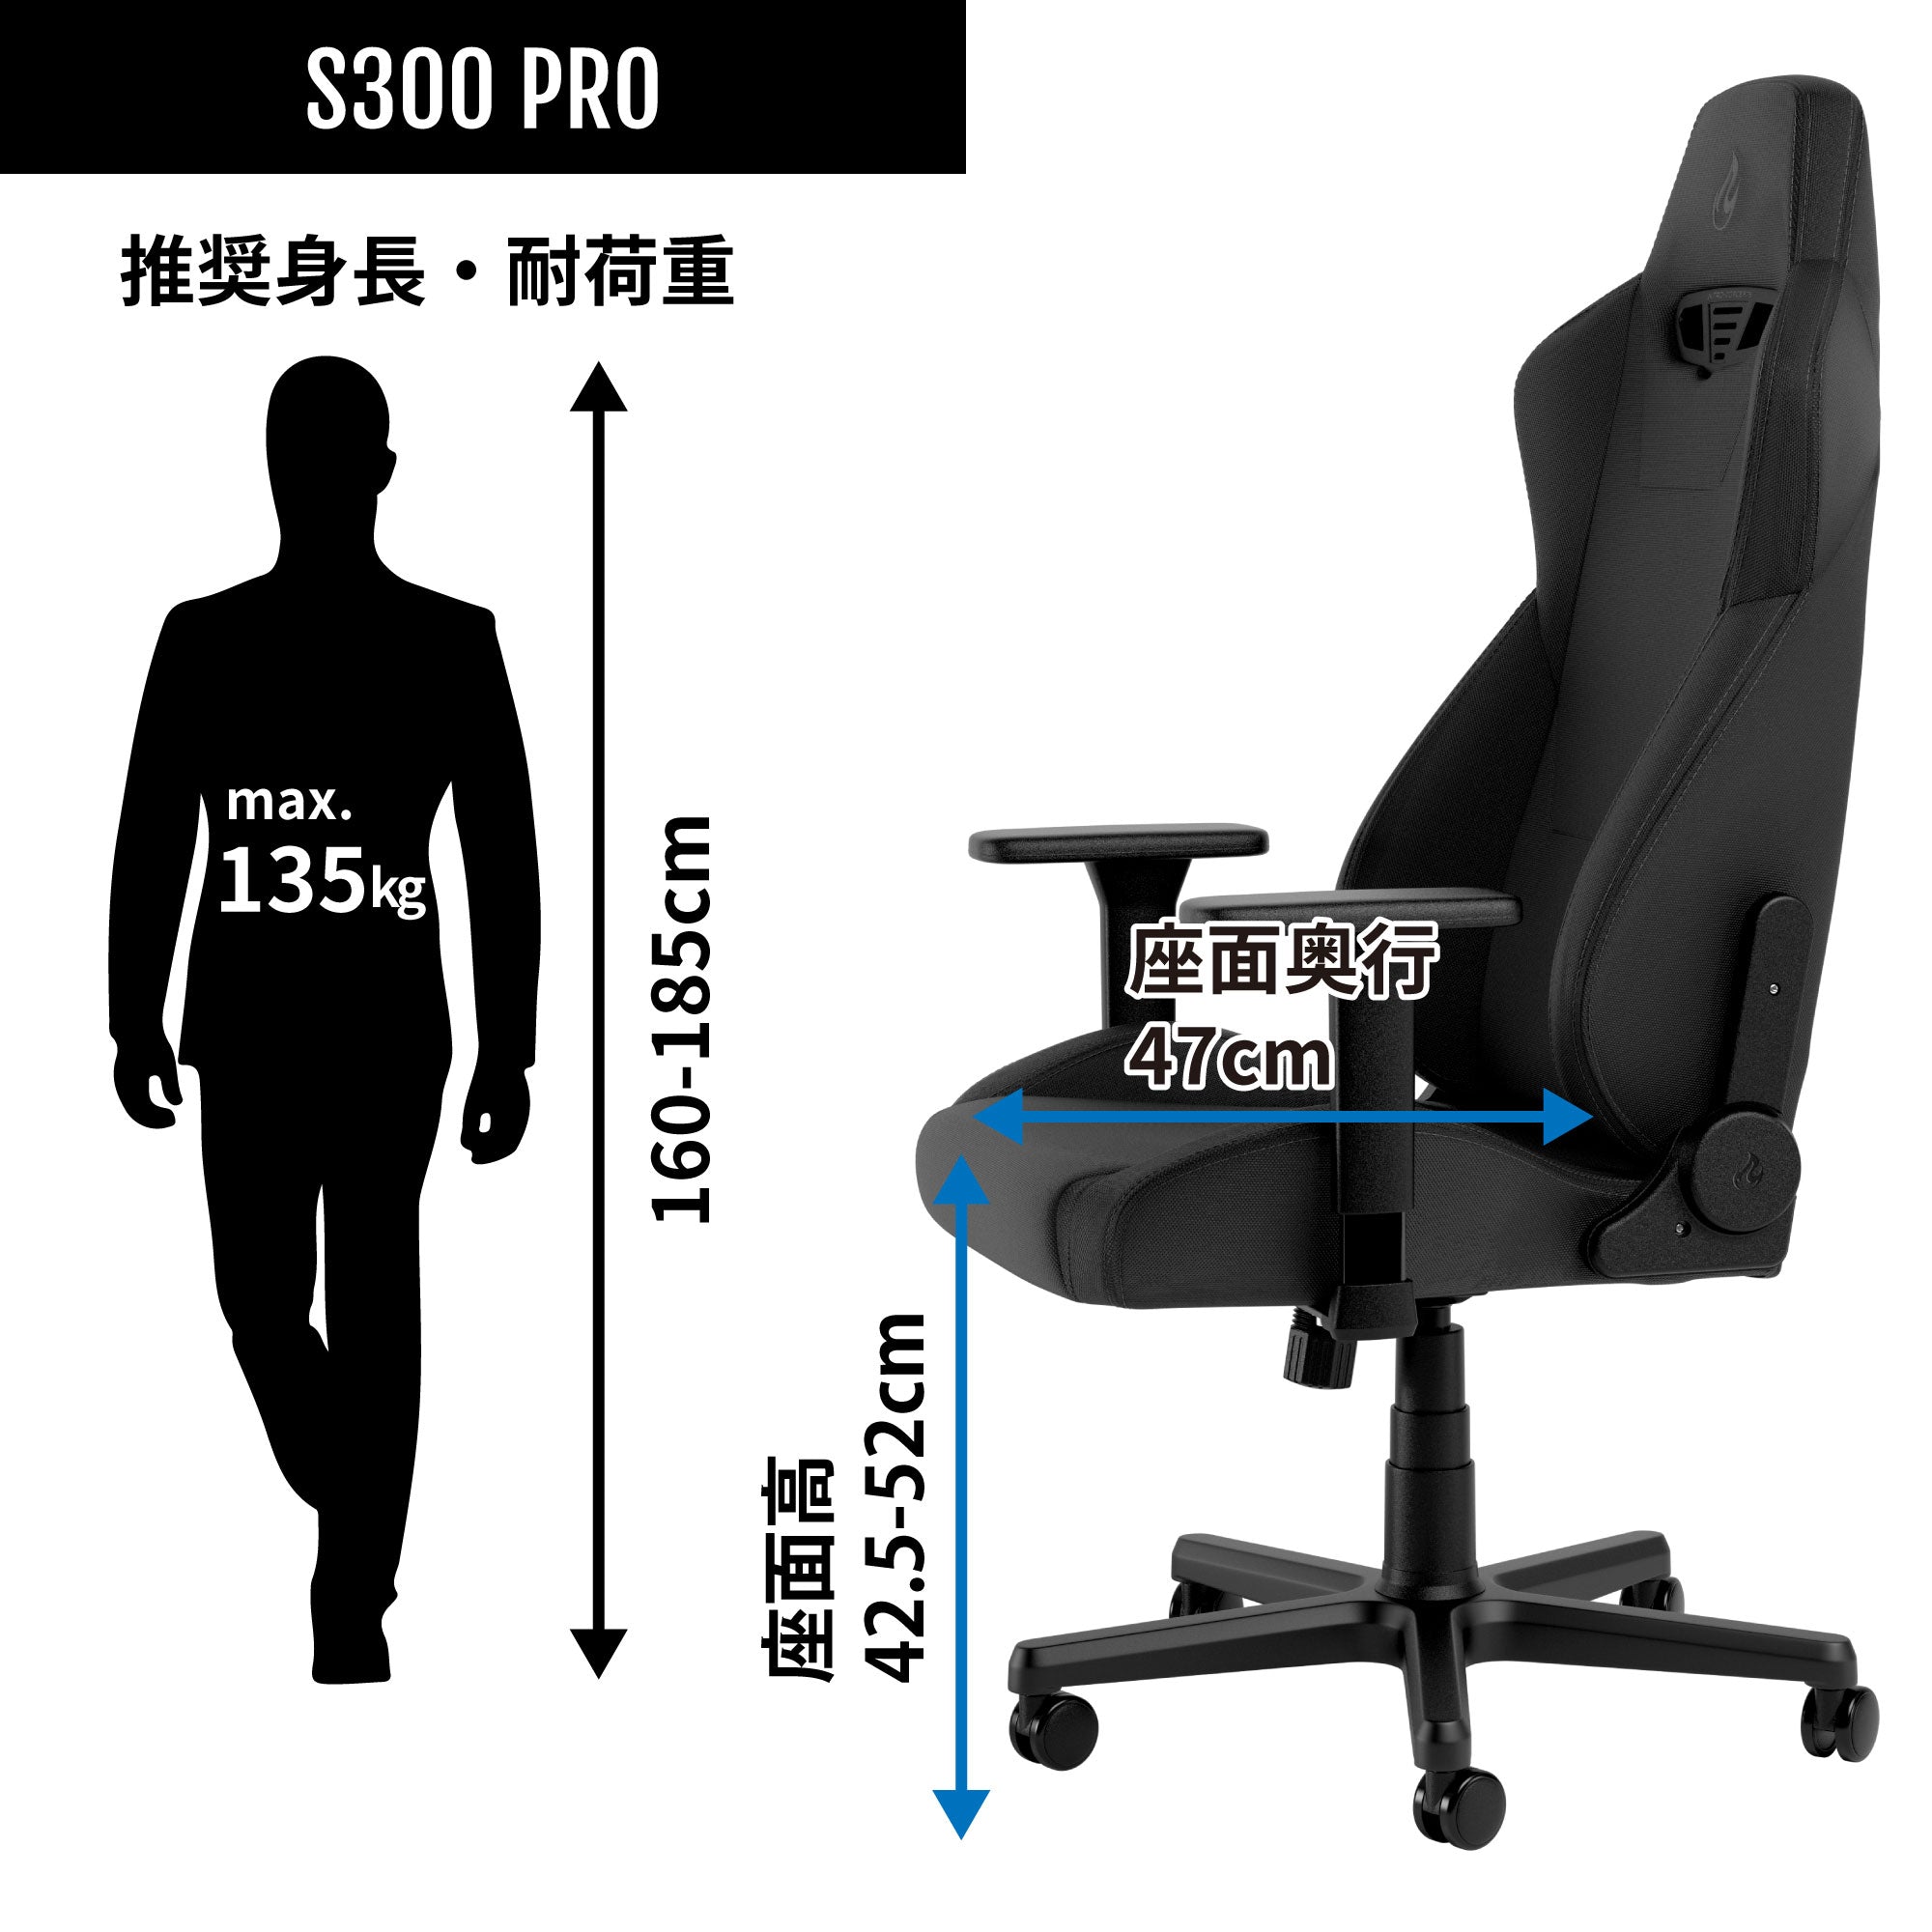 S300-PRO-SIZE-WEIGHT